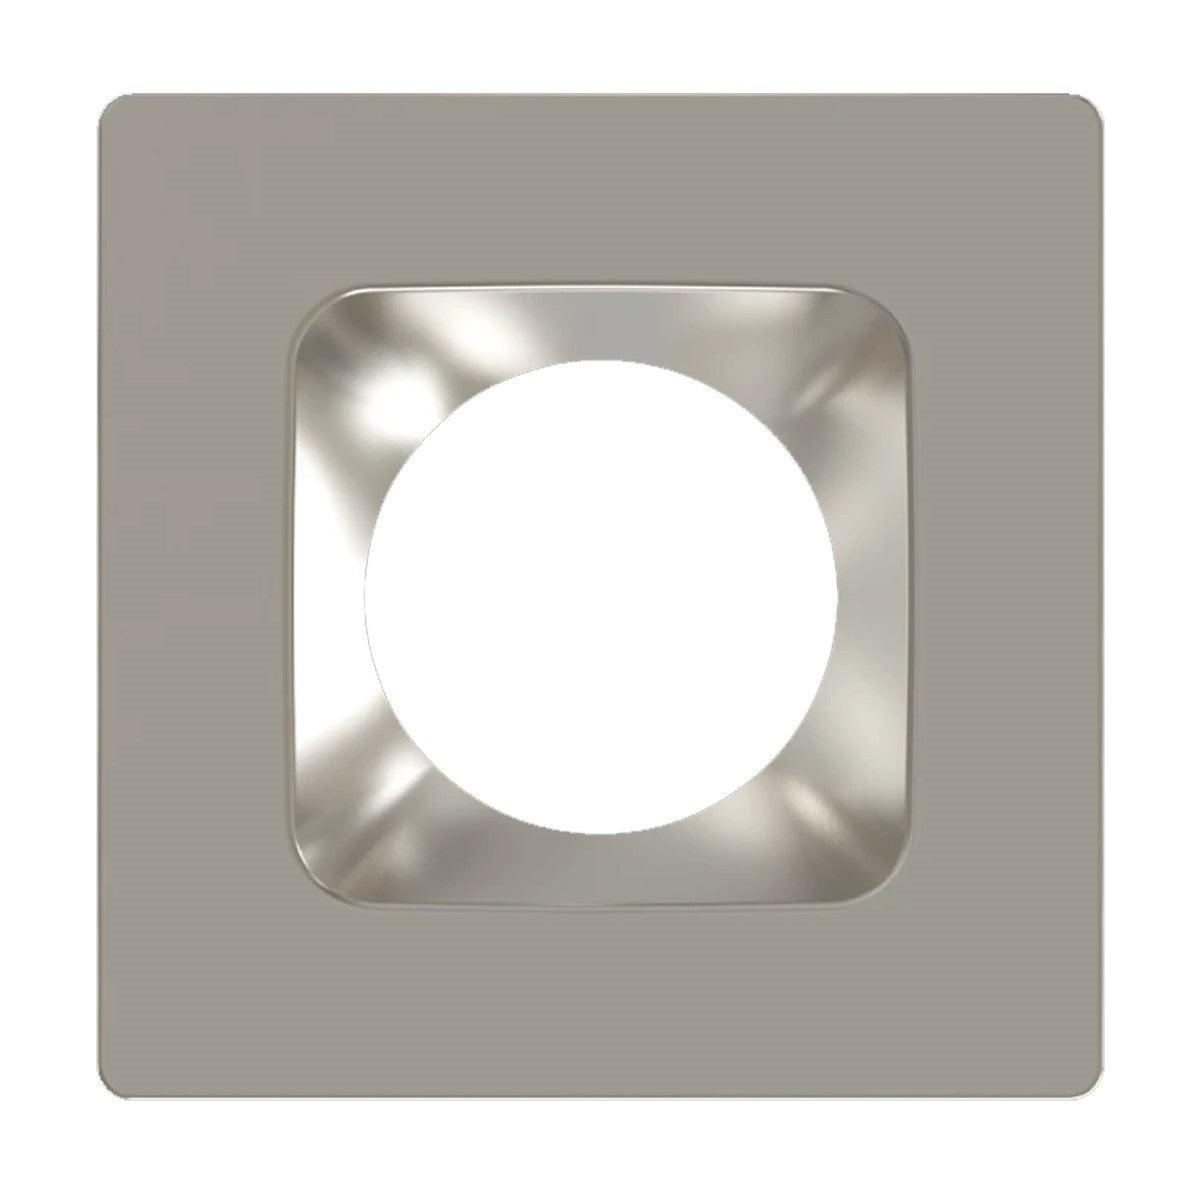 RAB 4 Inch Square Brushed Nickel / Smooth Trim for HA4 Series